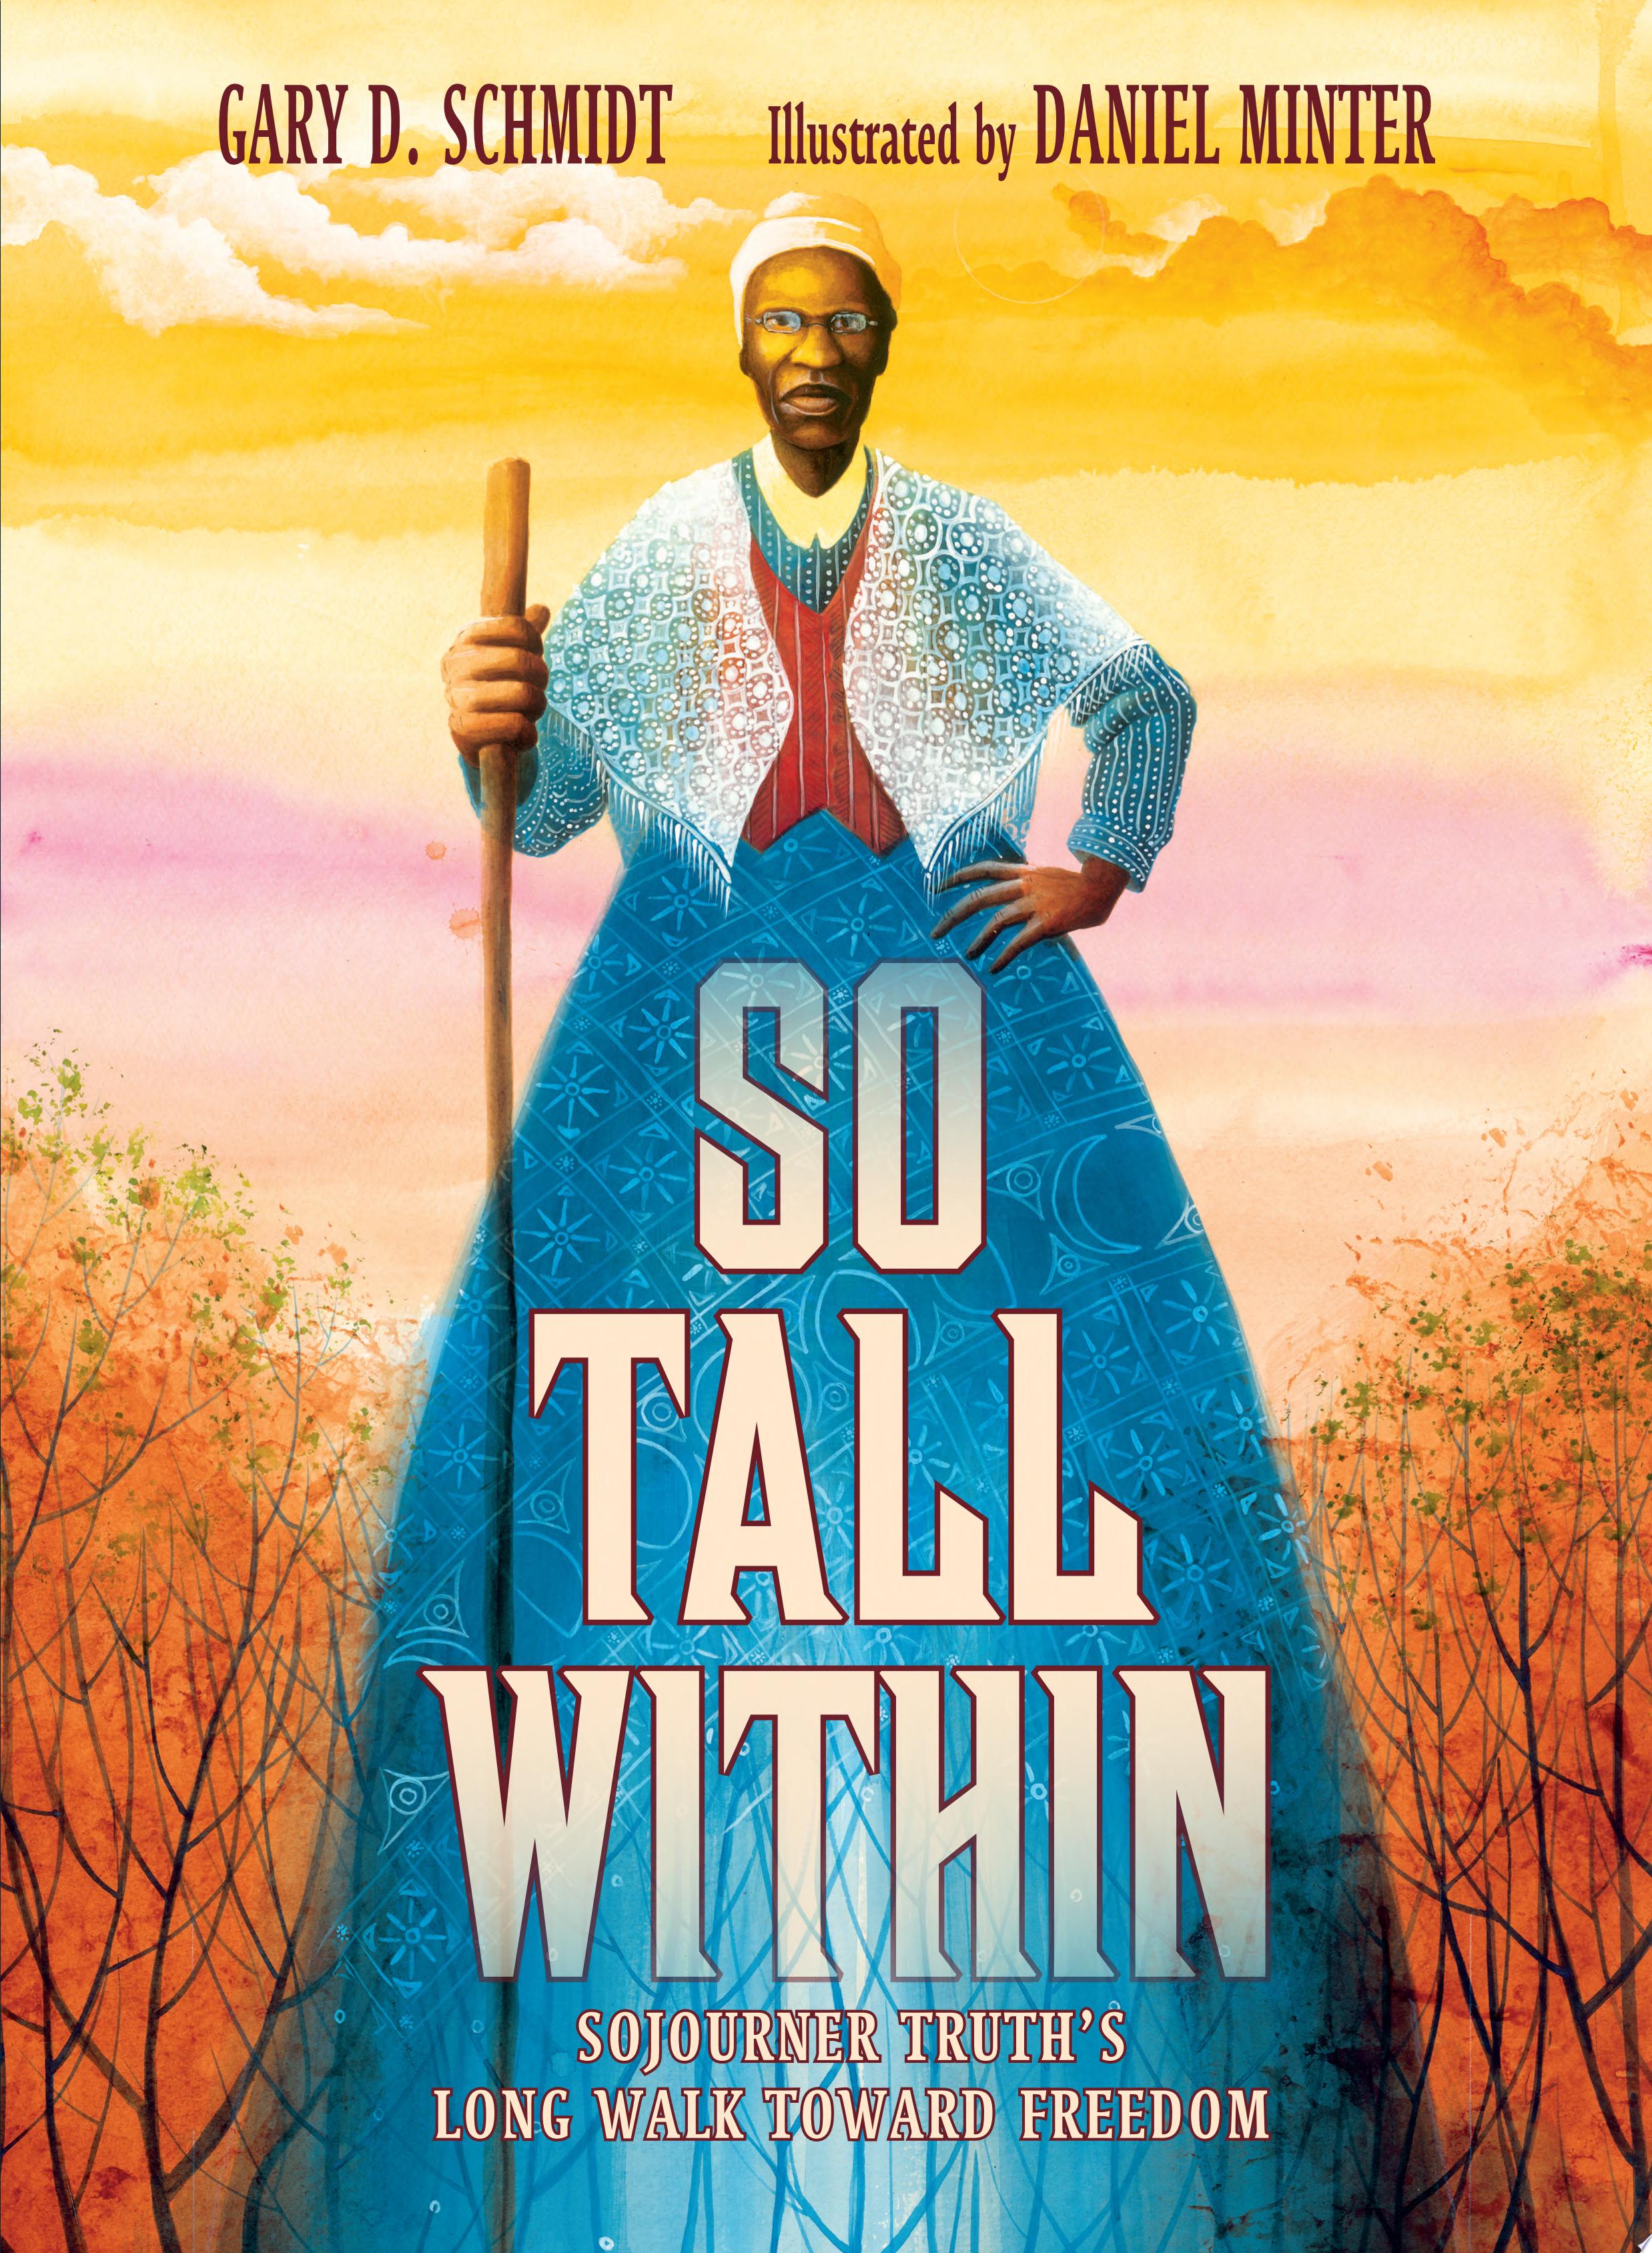 Image for "So Tall Within"